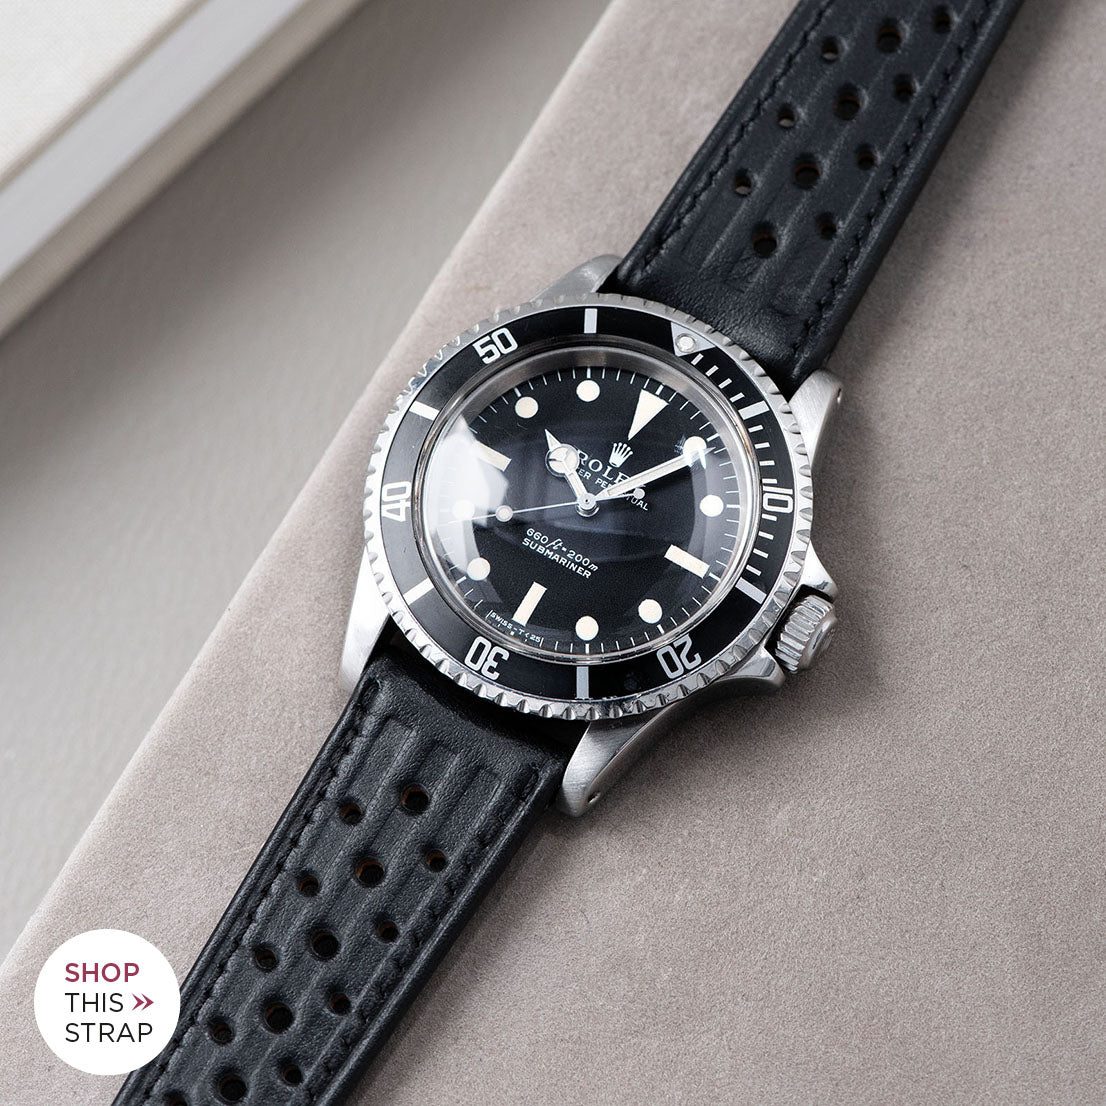 Bulang and Sons_Strap Guide_The Rolex 5513 Black Submariner_Racing Black Speedy Leather Watch Strap